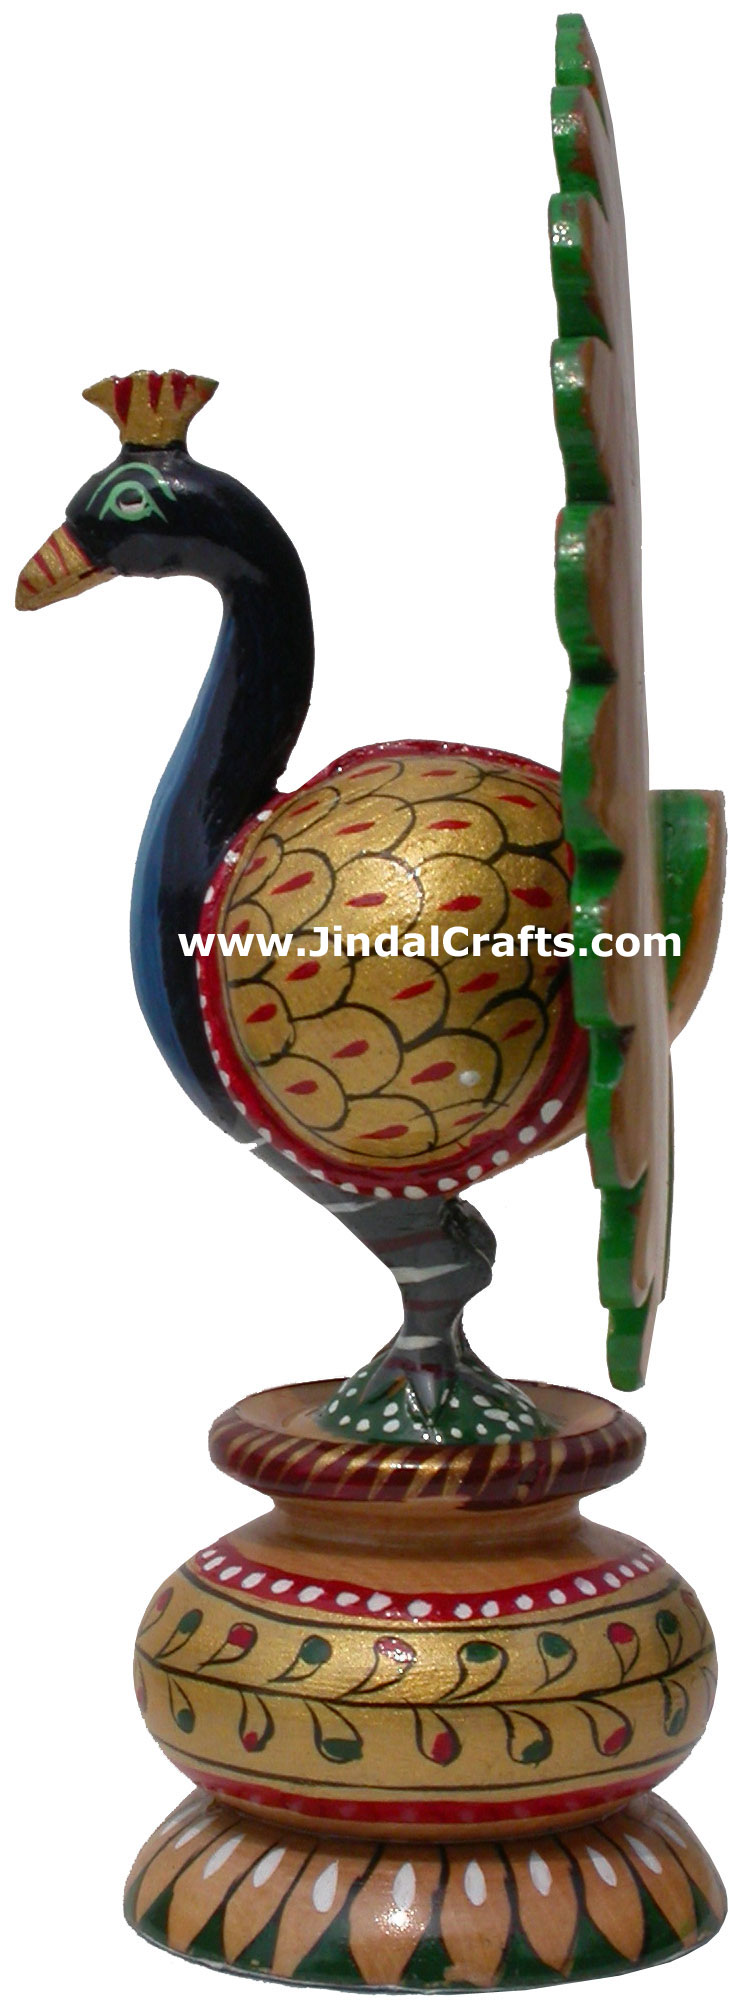 Peacock - Hand Carved Hand Painted Wooden Bird Figure Indian Handicrafts Gift